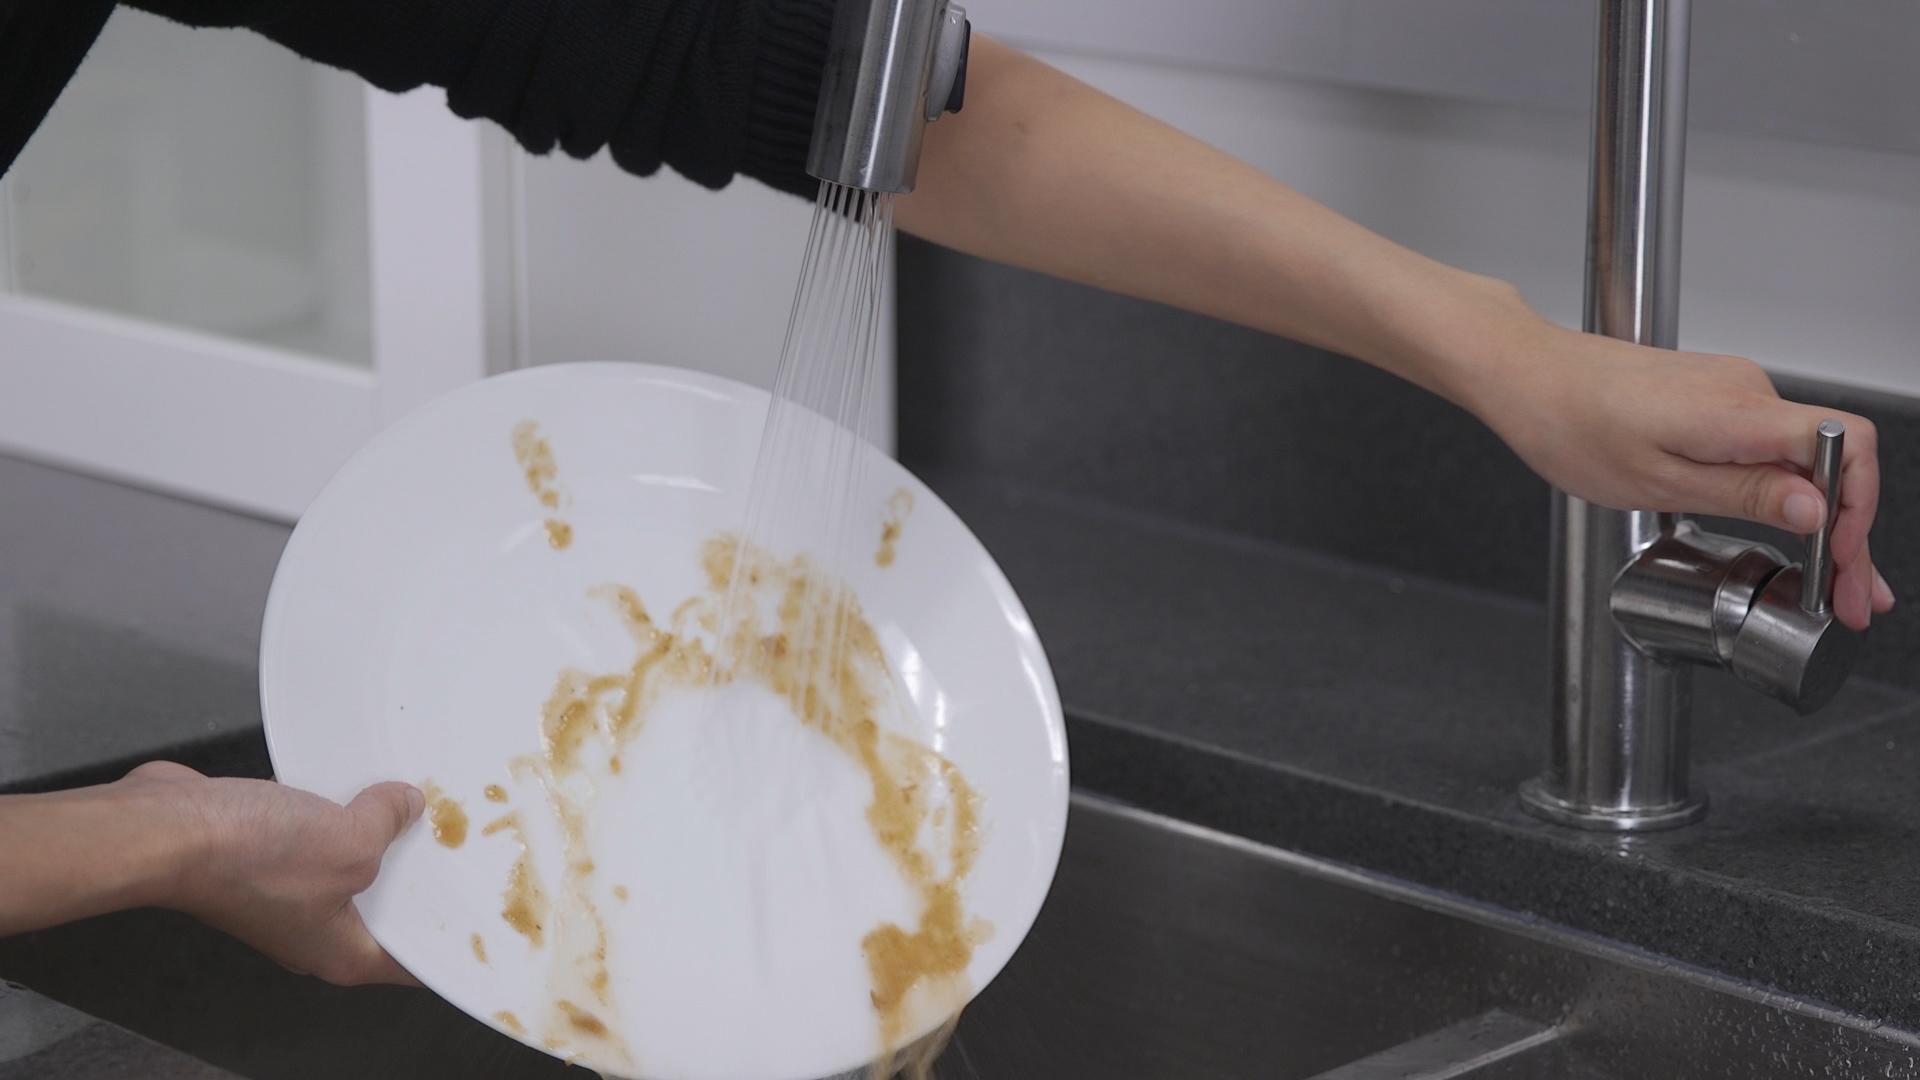 Here's how dishwashers dry your dishes - Reviewed